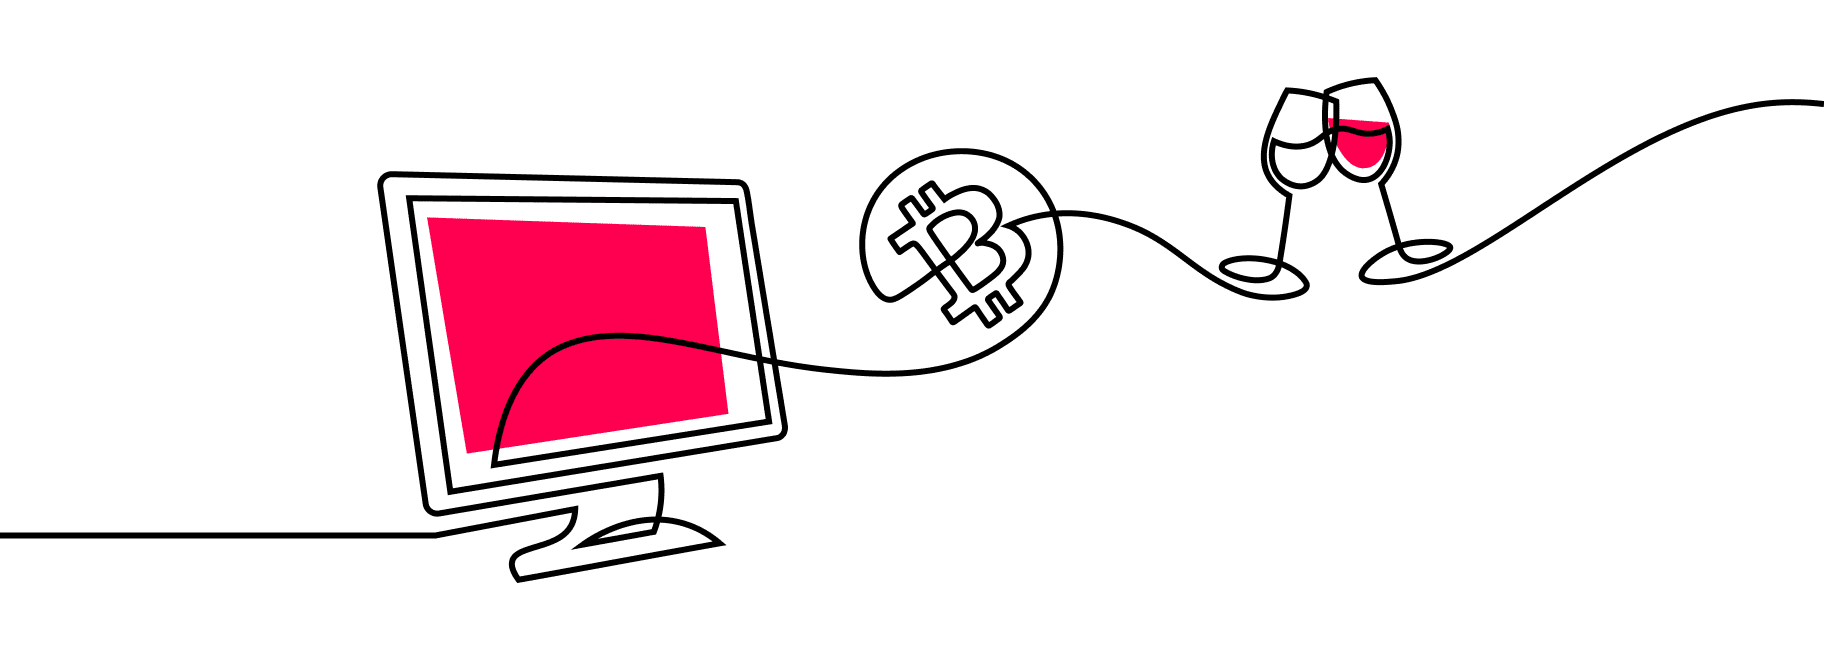 An illustration of a bitcoin coming out of a computer and turning into wine glasses using a single contiguous line